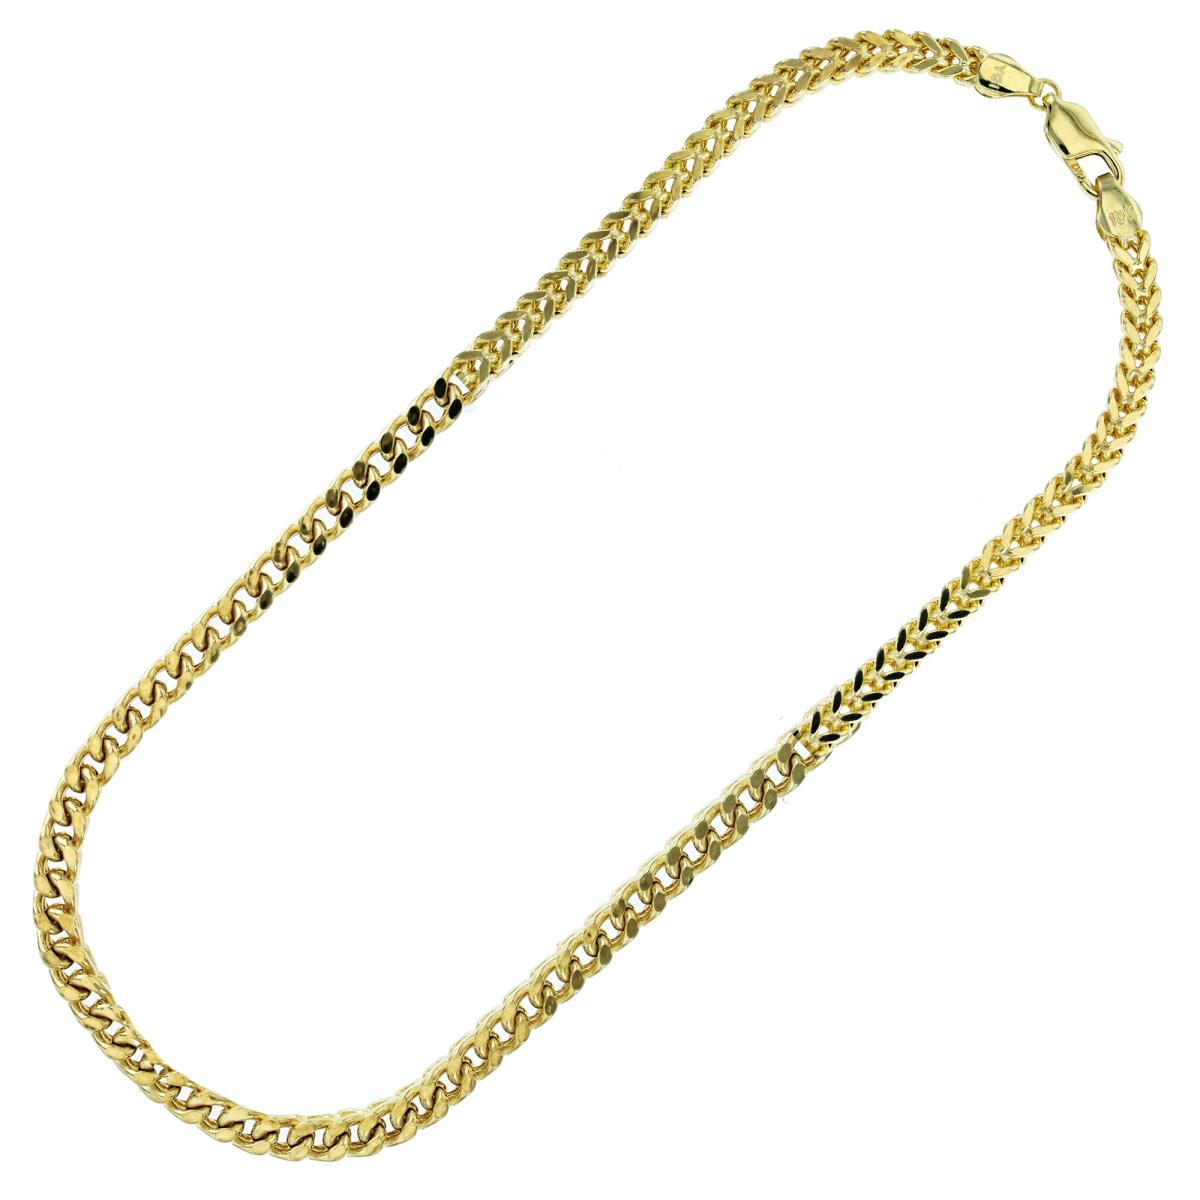 10K Yellow Gold 4.35mm 24" 110 Hollow Franco Chain